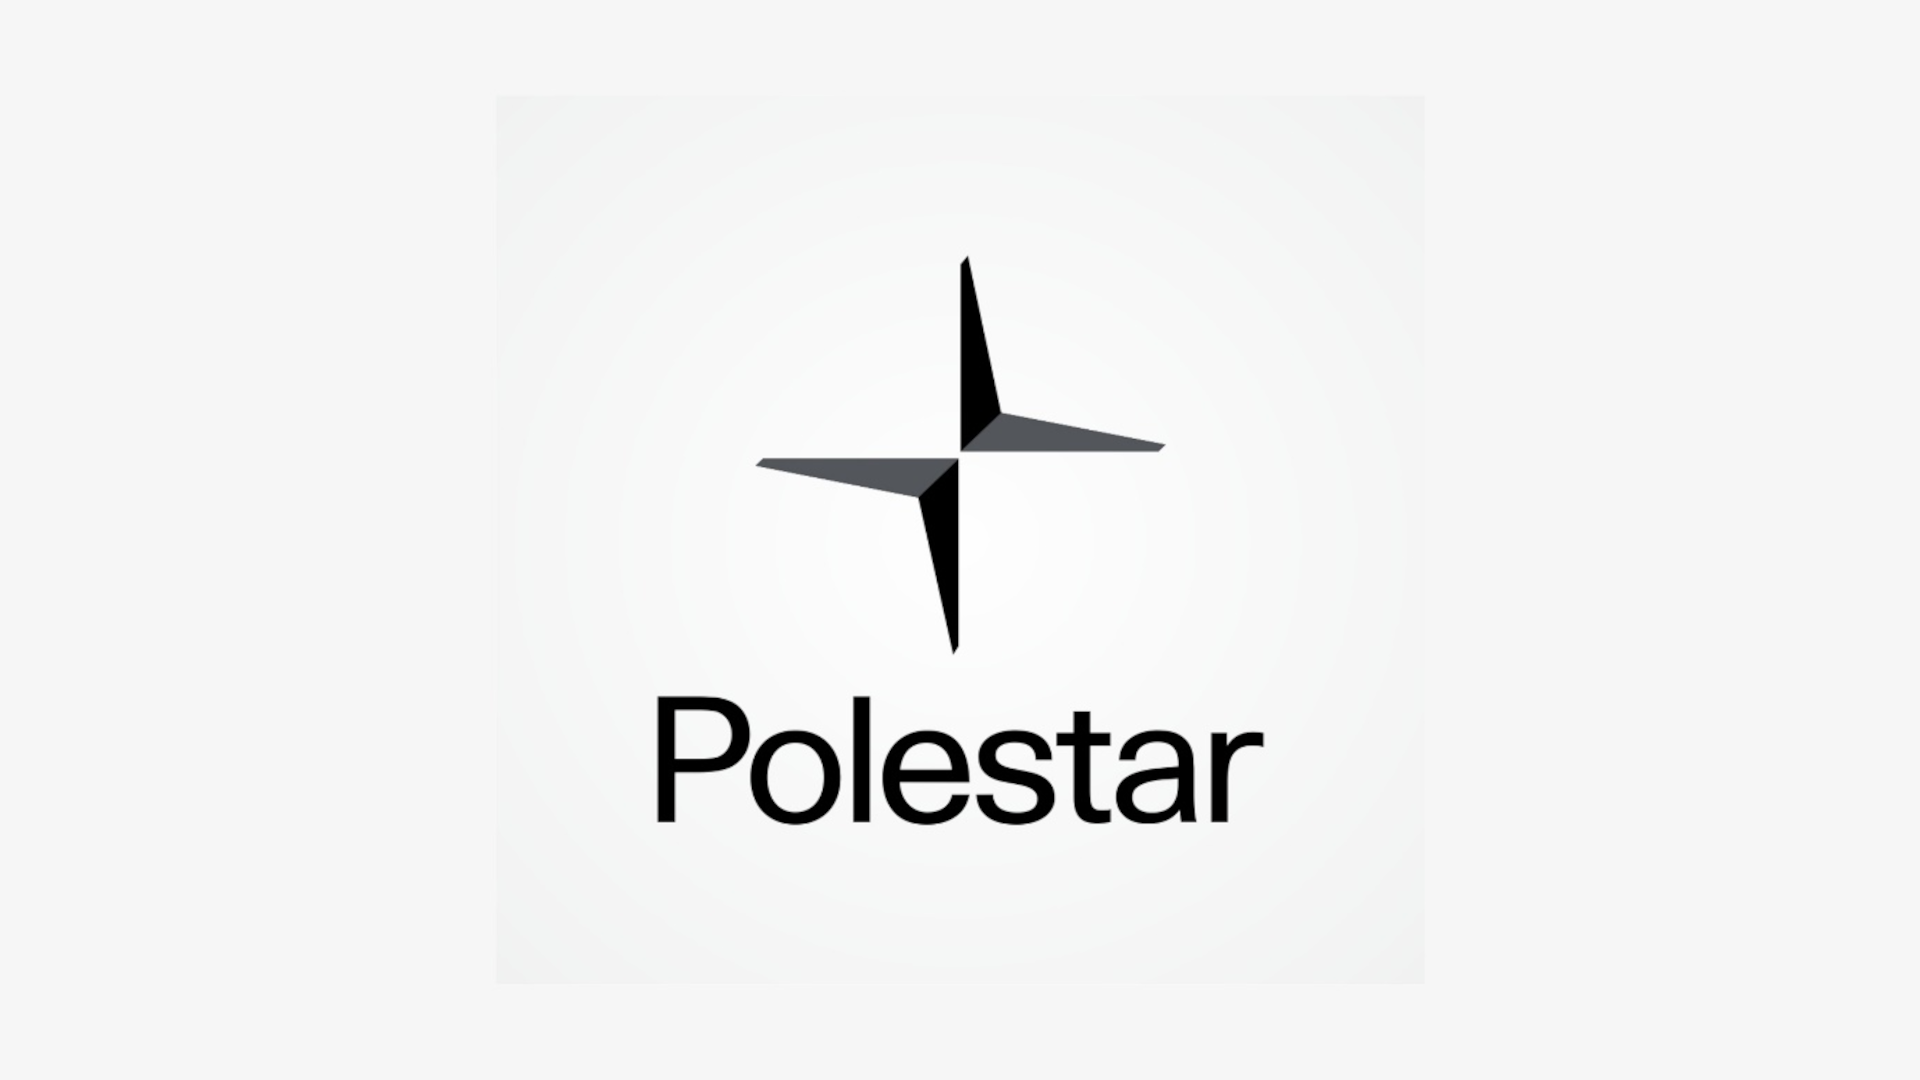 Polestar Calls Out Lack Of Action